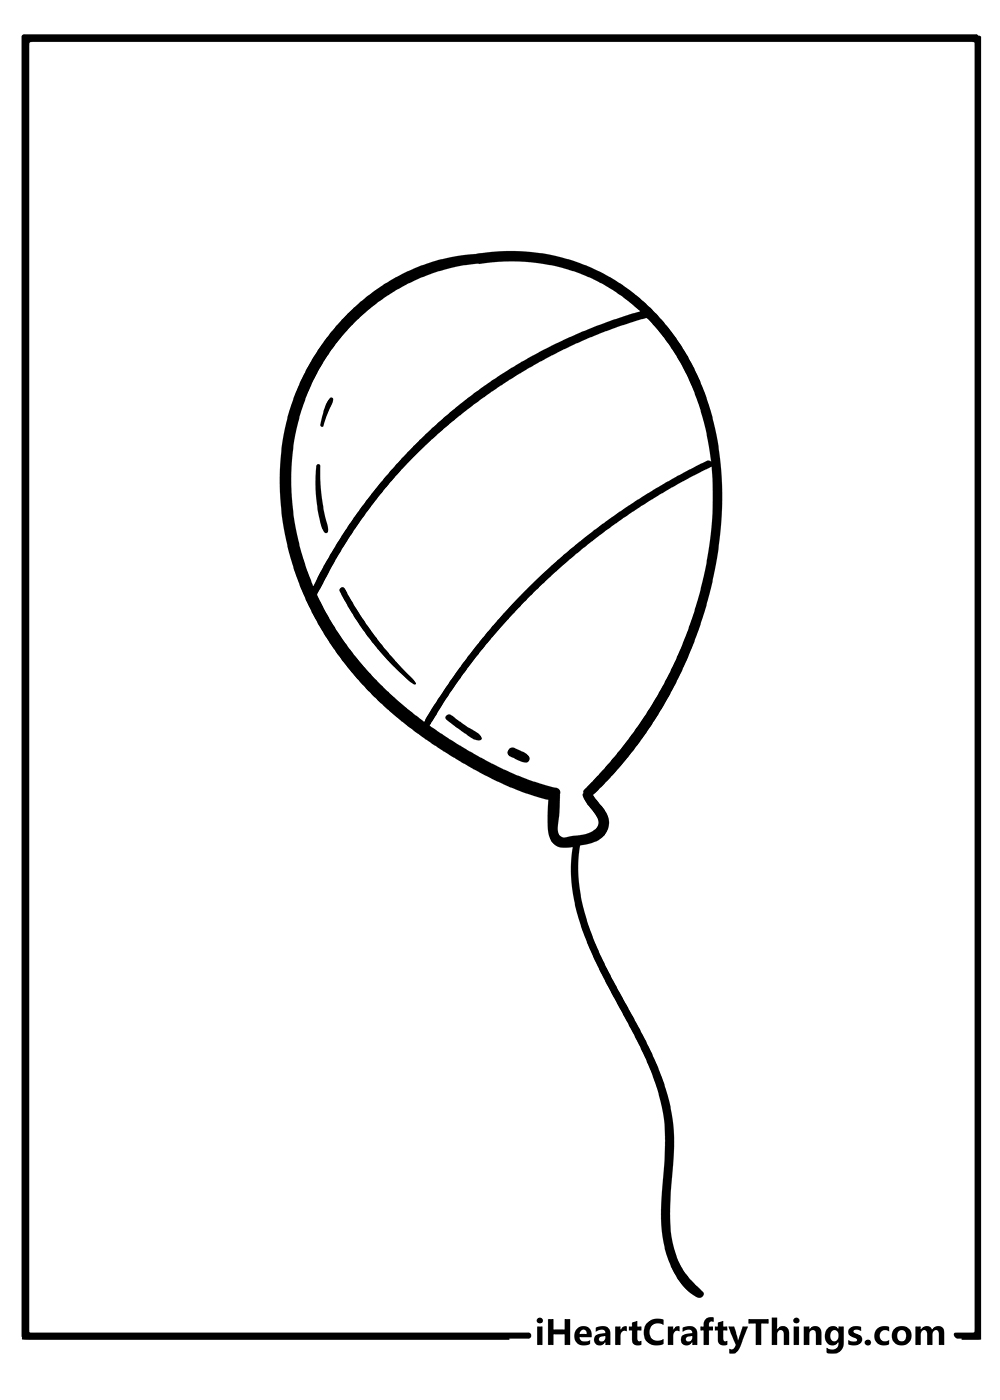 Balloons Coloring Pages for adults free printable